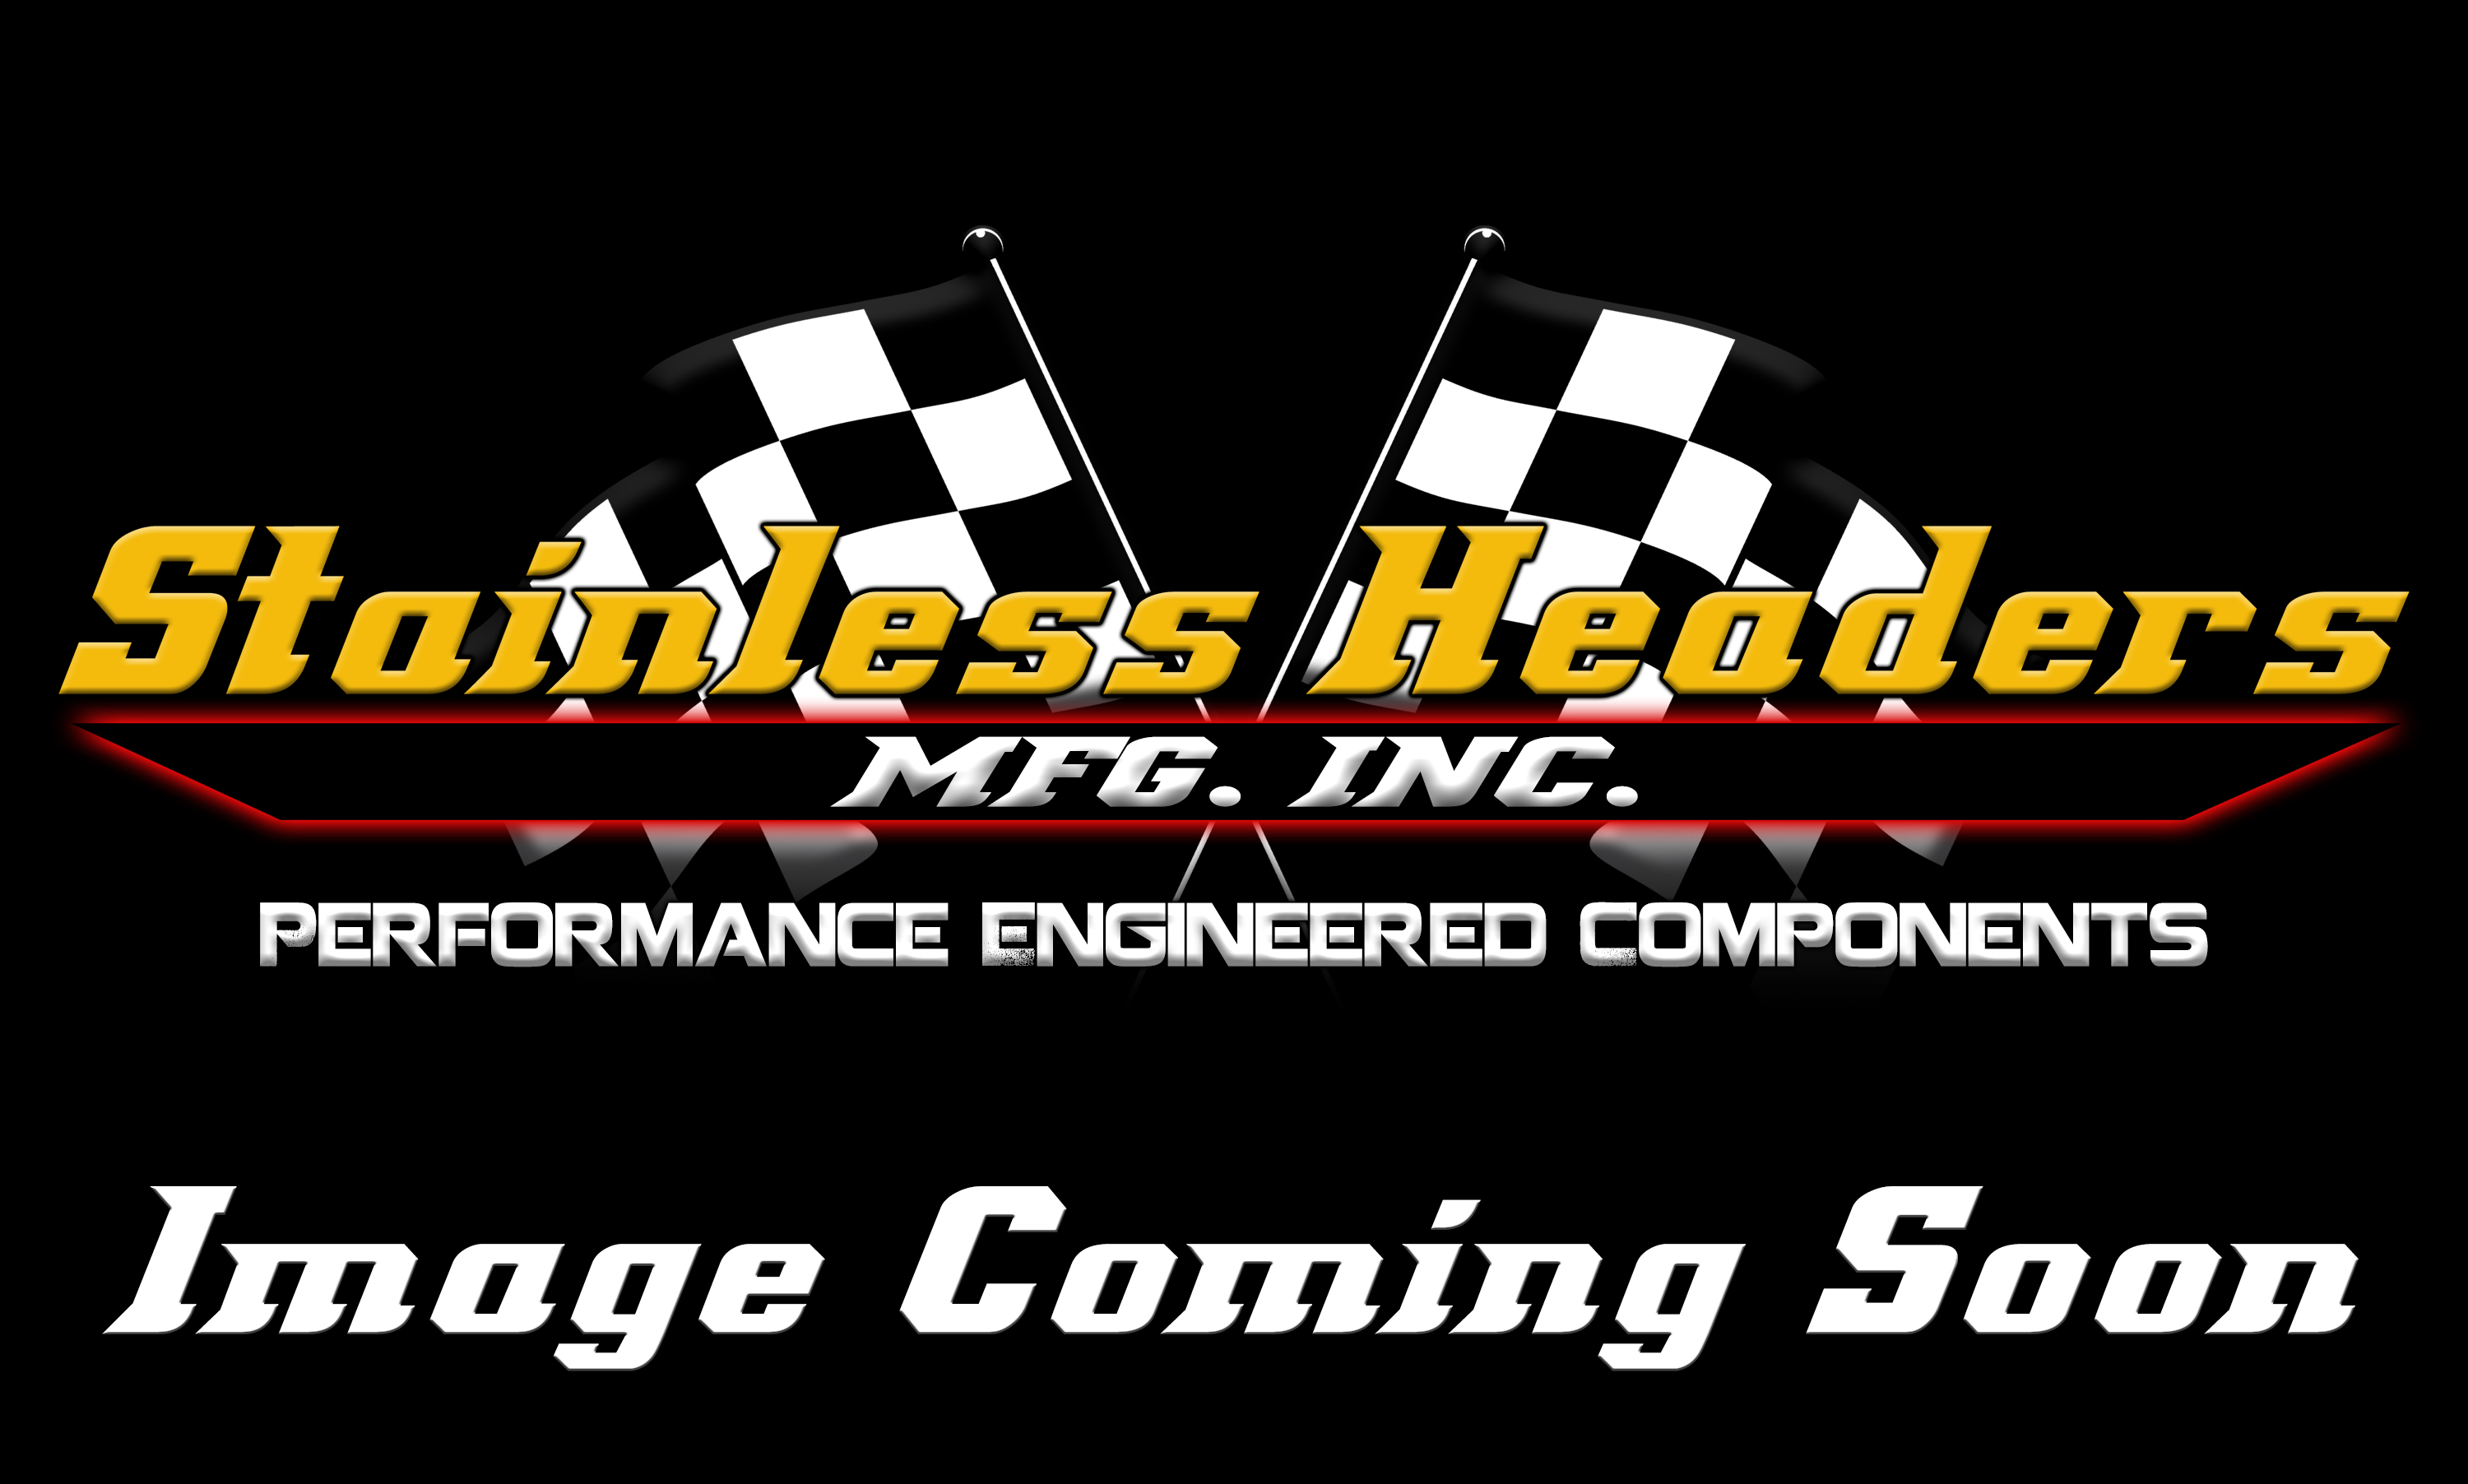 Merge Collectors - 321 Stainless Steel Merge Collectors - Stainless Headers - 2 1/8" Primary 5 into 1 Performance Merge Collector-16ga 321ss